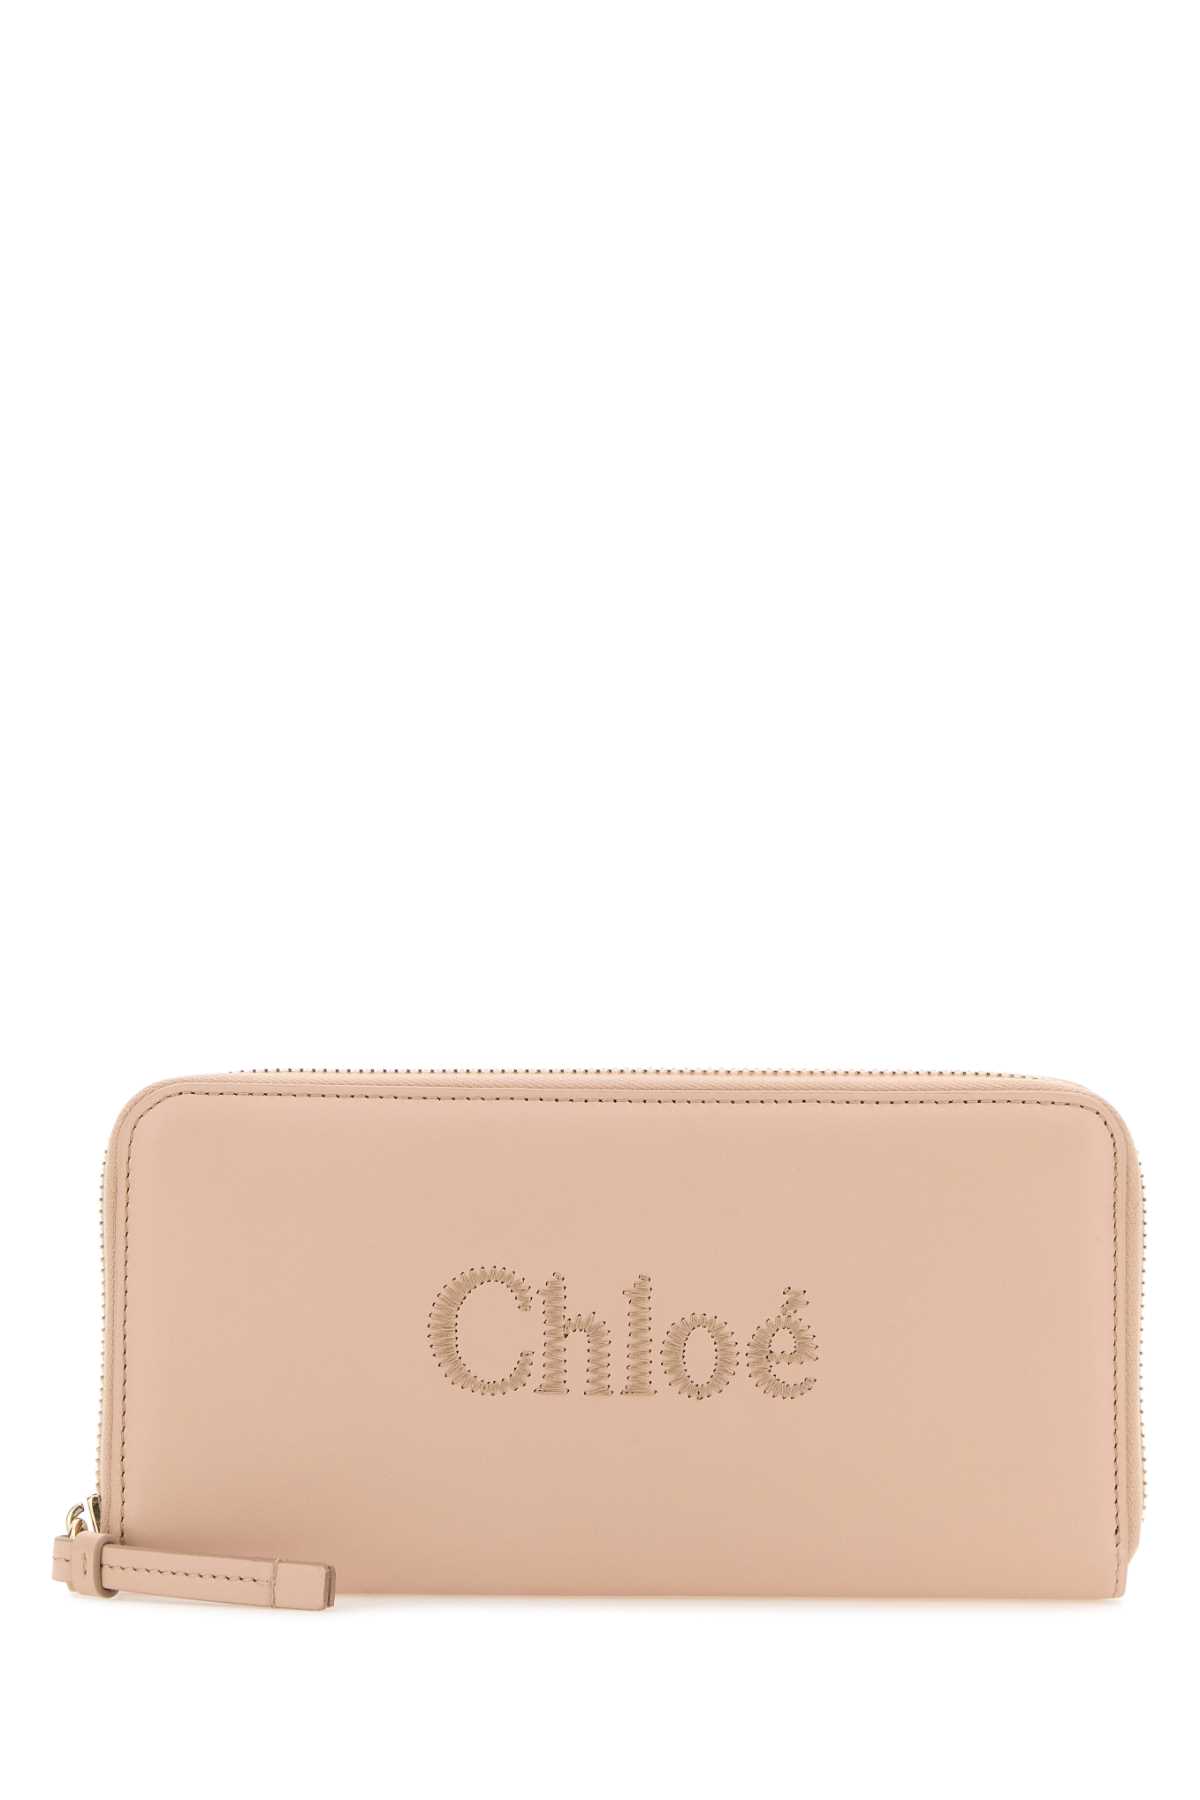 Shop Chloé Skin Pink Nappa Leather Wallet In Cementpink